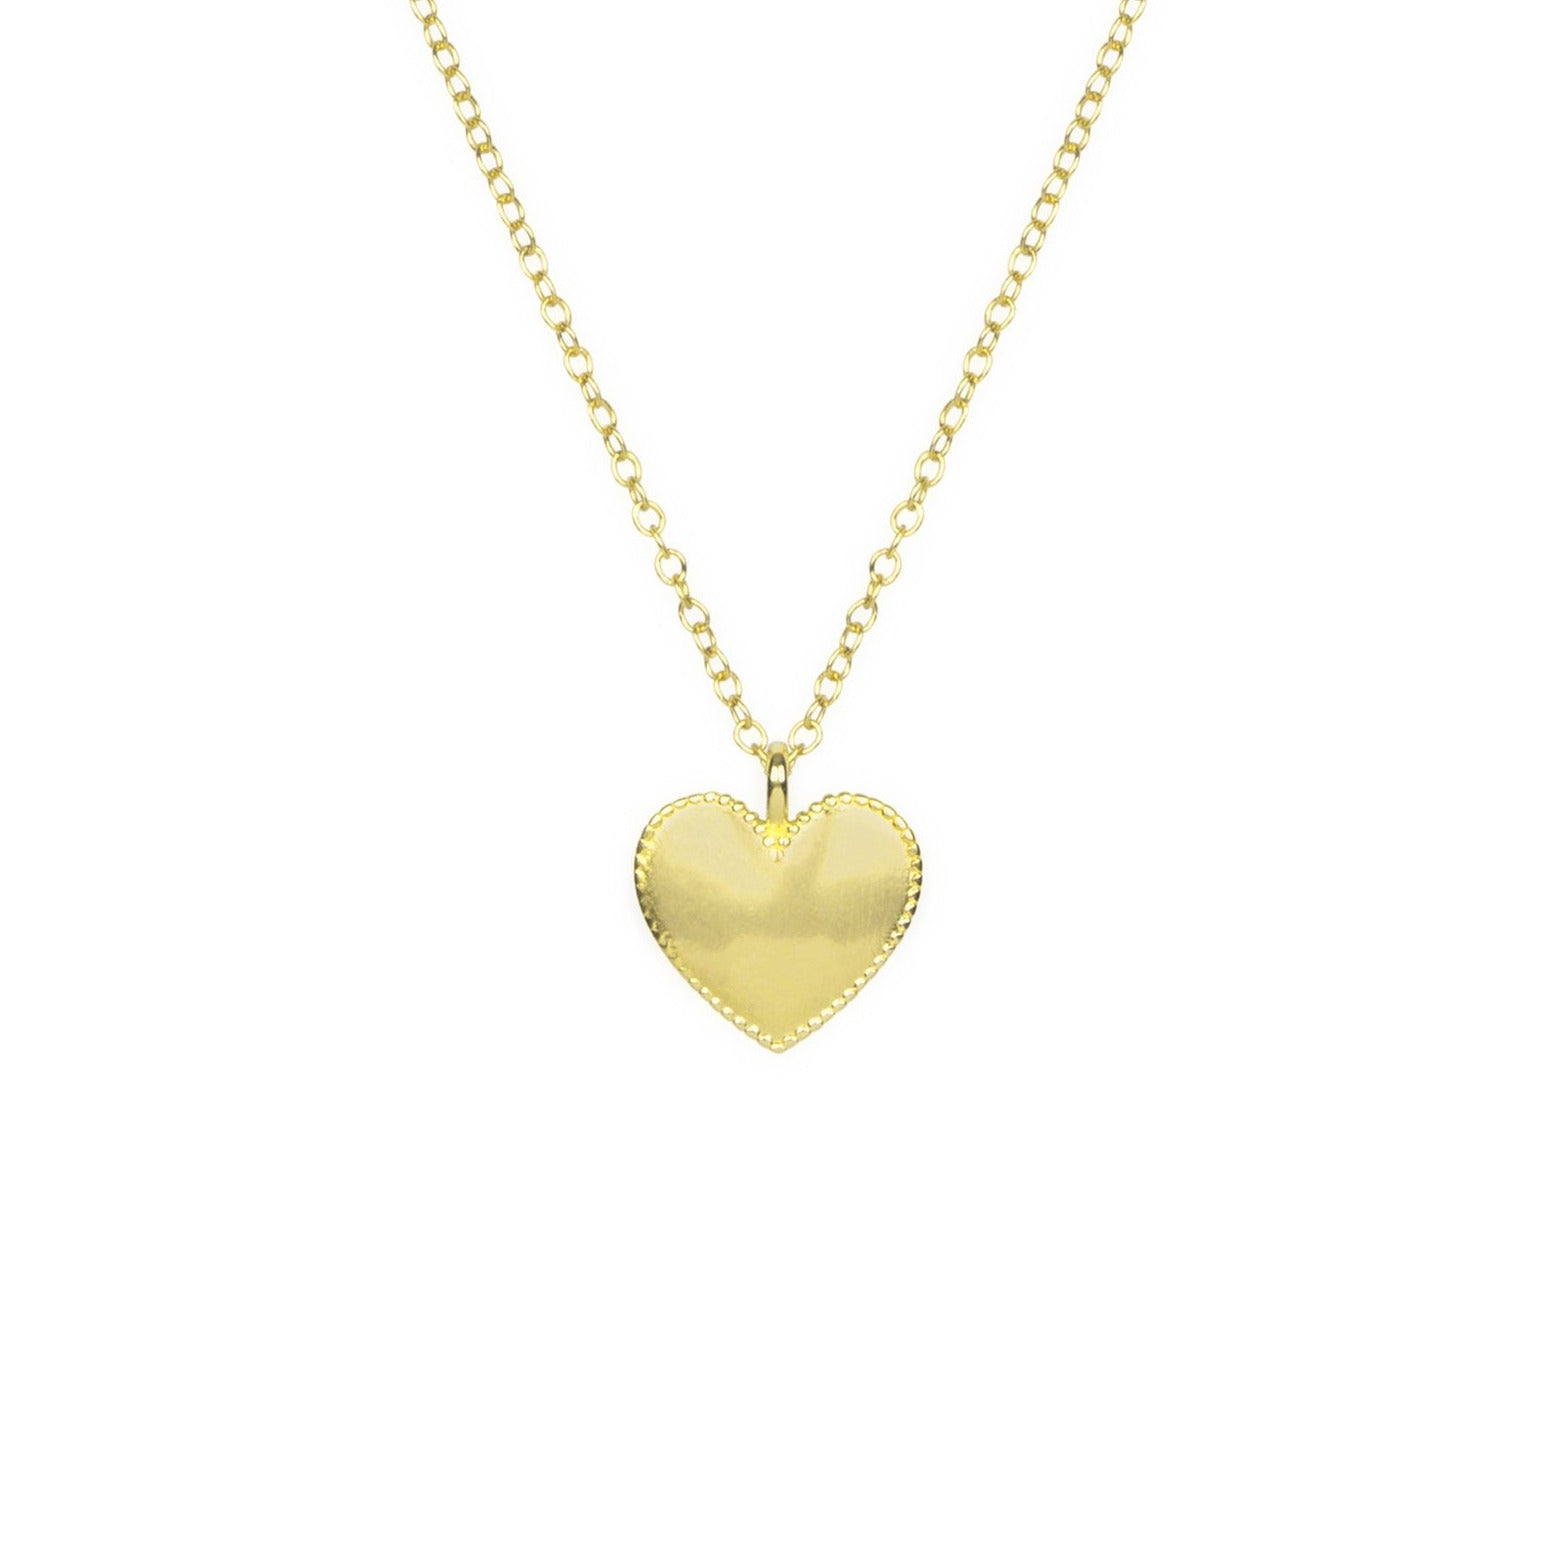 Gold Beaded Heart Necklace by Katie Dean Jewelry, made in America, perfect for the dainty minimal jewelry lovers